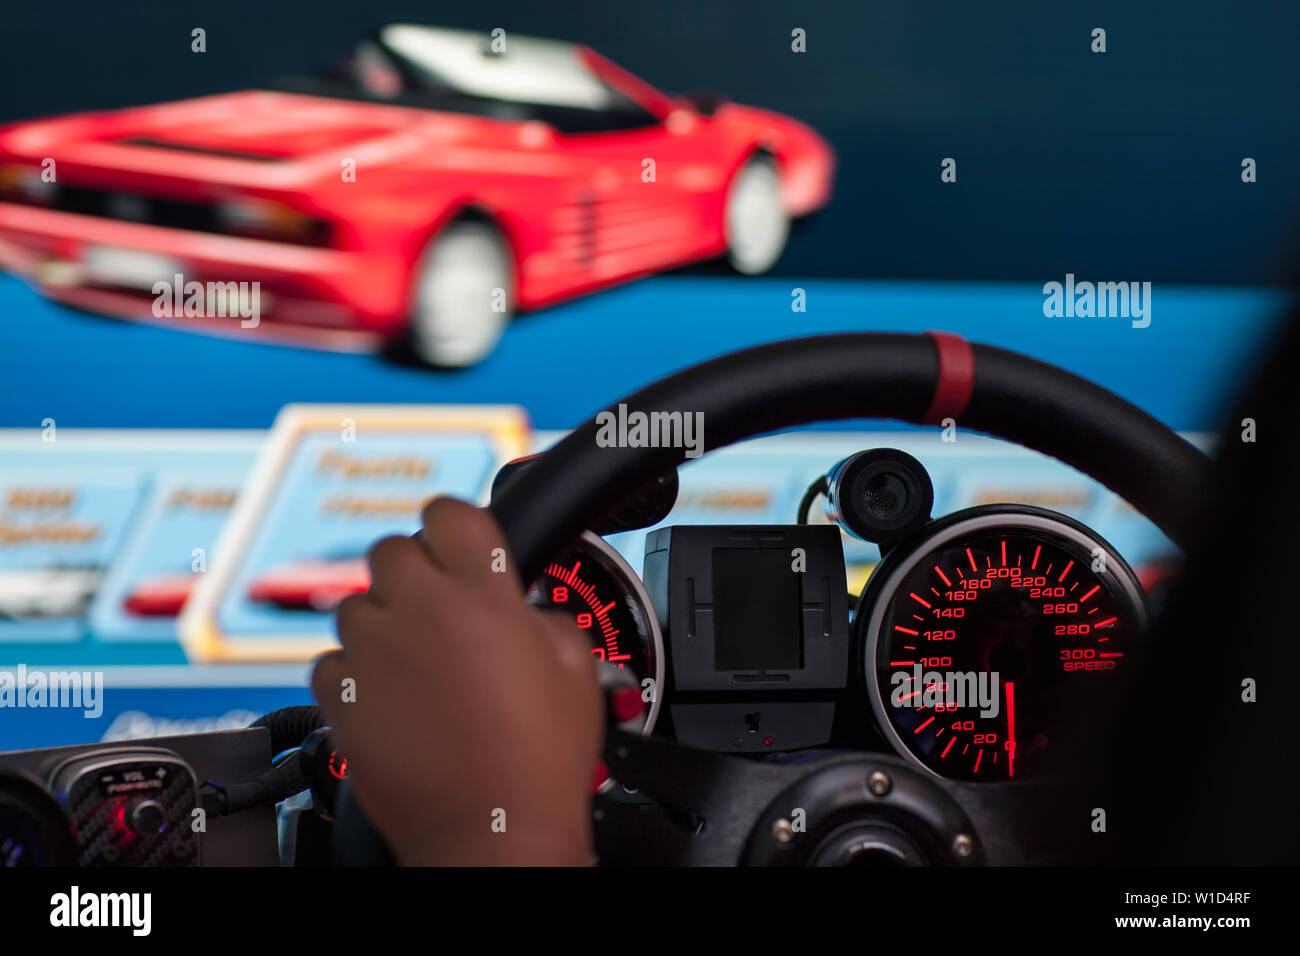 Closeup view of someone playing a retro style arcade racing game on a simulator cockpit with lit gauges. Stock Photo